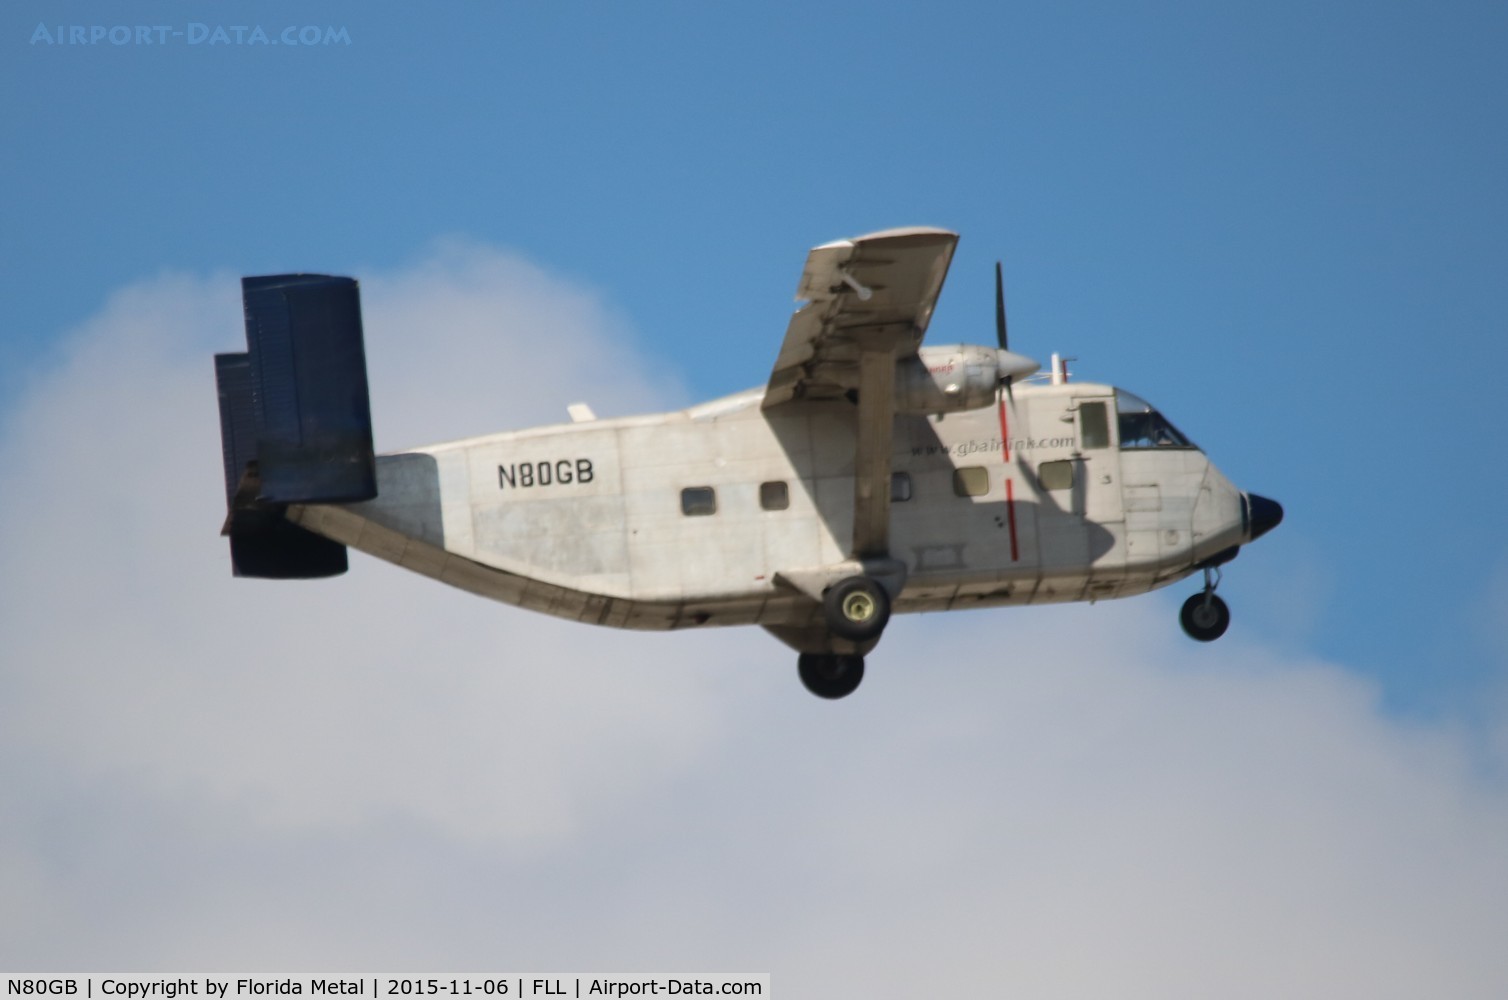 N80GB, 1970 Short SC-7 Skyvan 3M-400 C/N SH.1888, This particular SC-7 will be infamously known as 